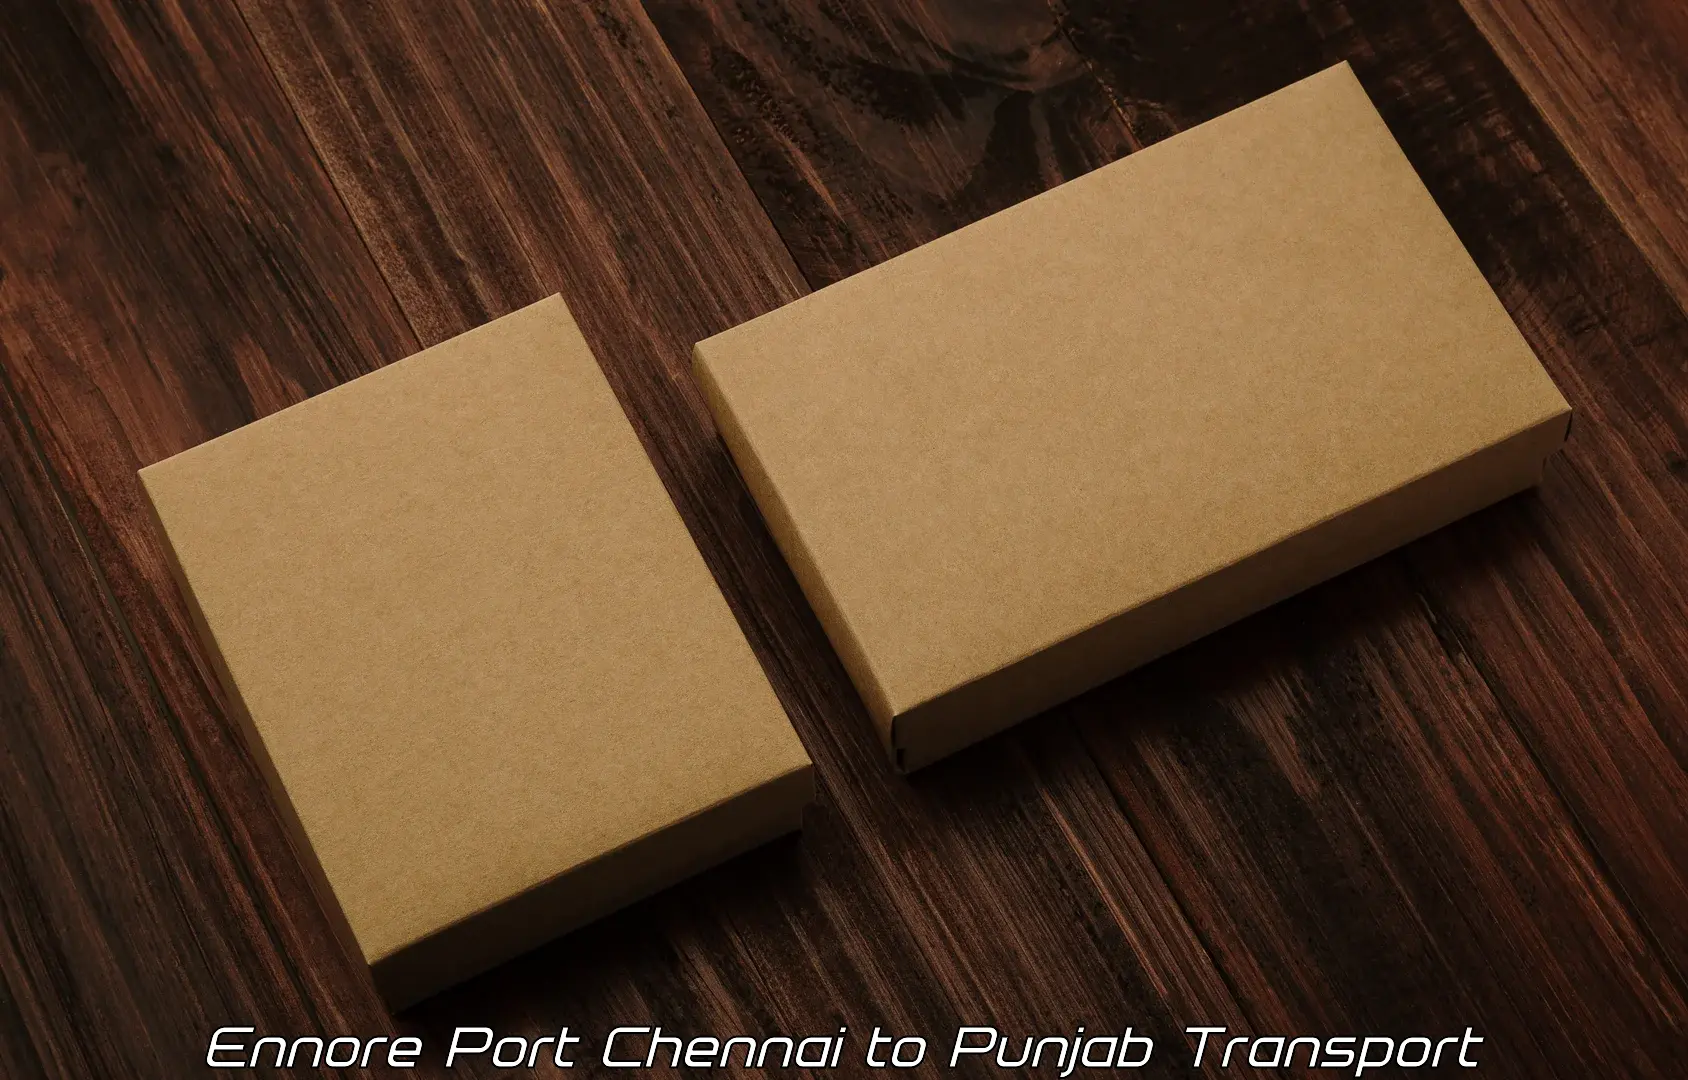 Package delivery services Ennore Port Chennai to Muktsar